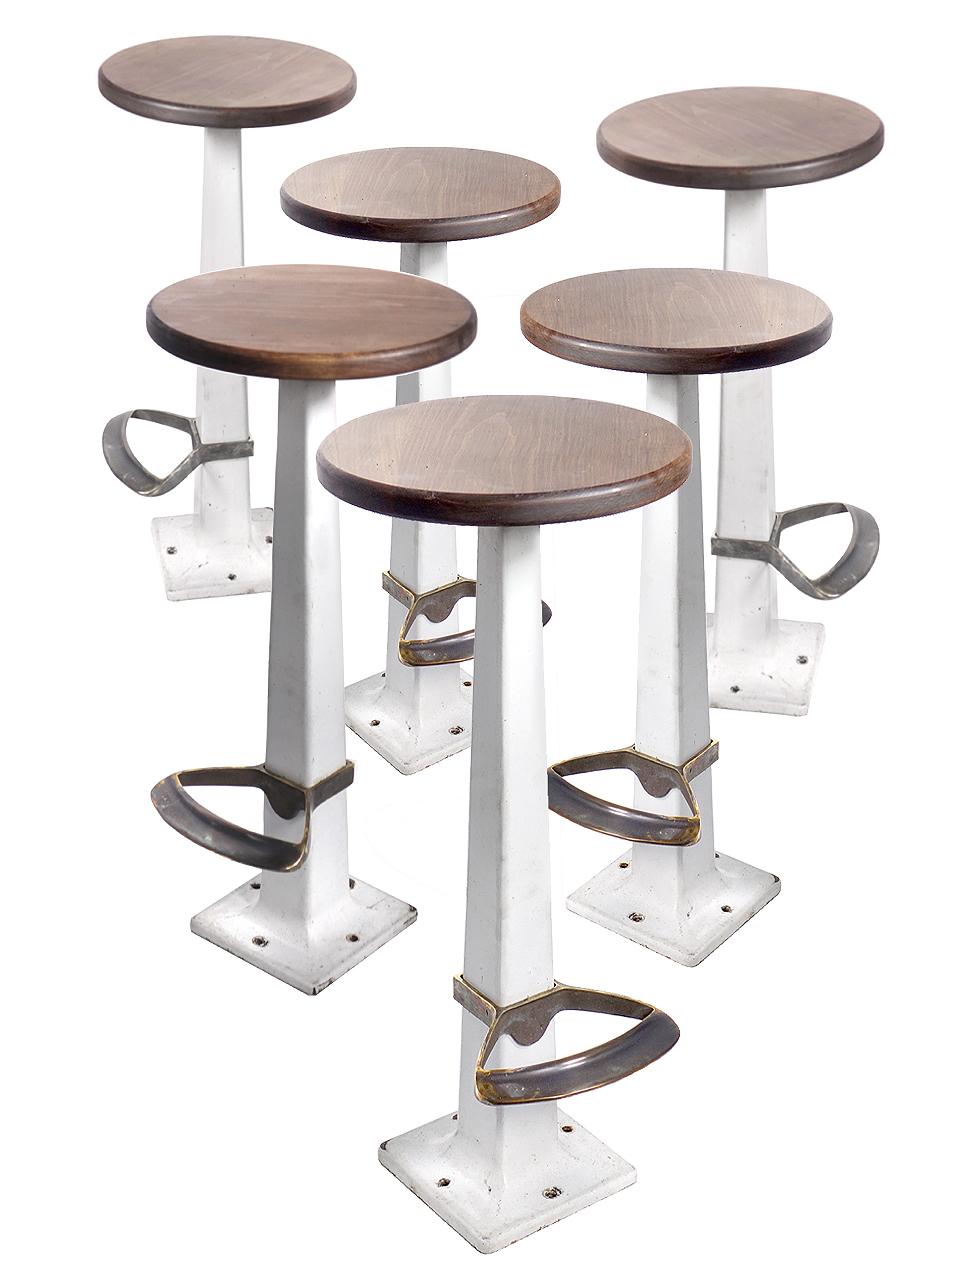 We have a collection of matching white porcelain counter stools. The bases show some age but each is too nice an original to refinish. They all have the rare slip on foot stools plus new Oak seats. They are sold as a set of six. All are signed on